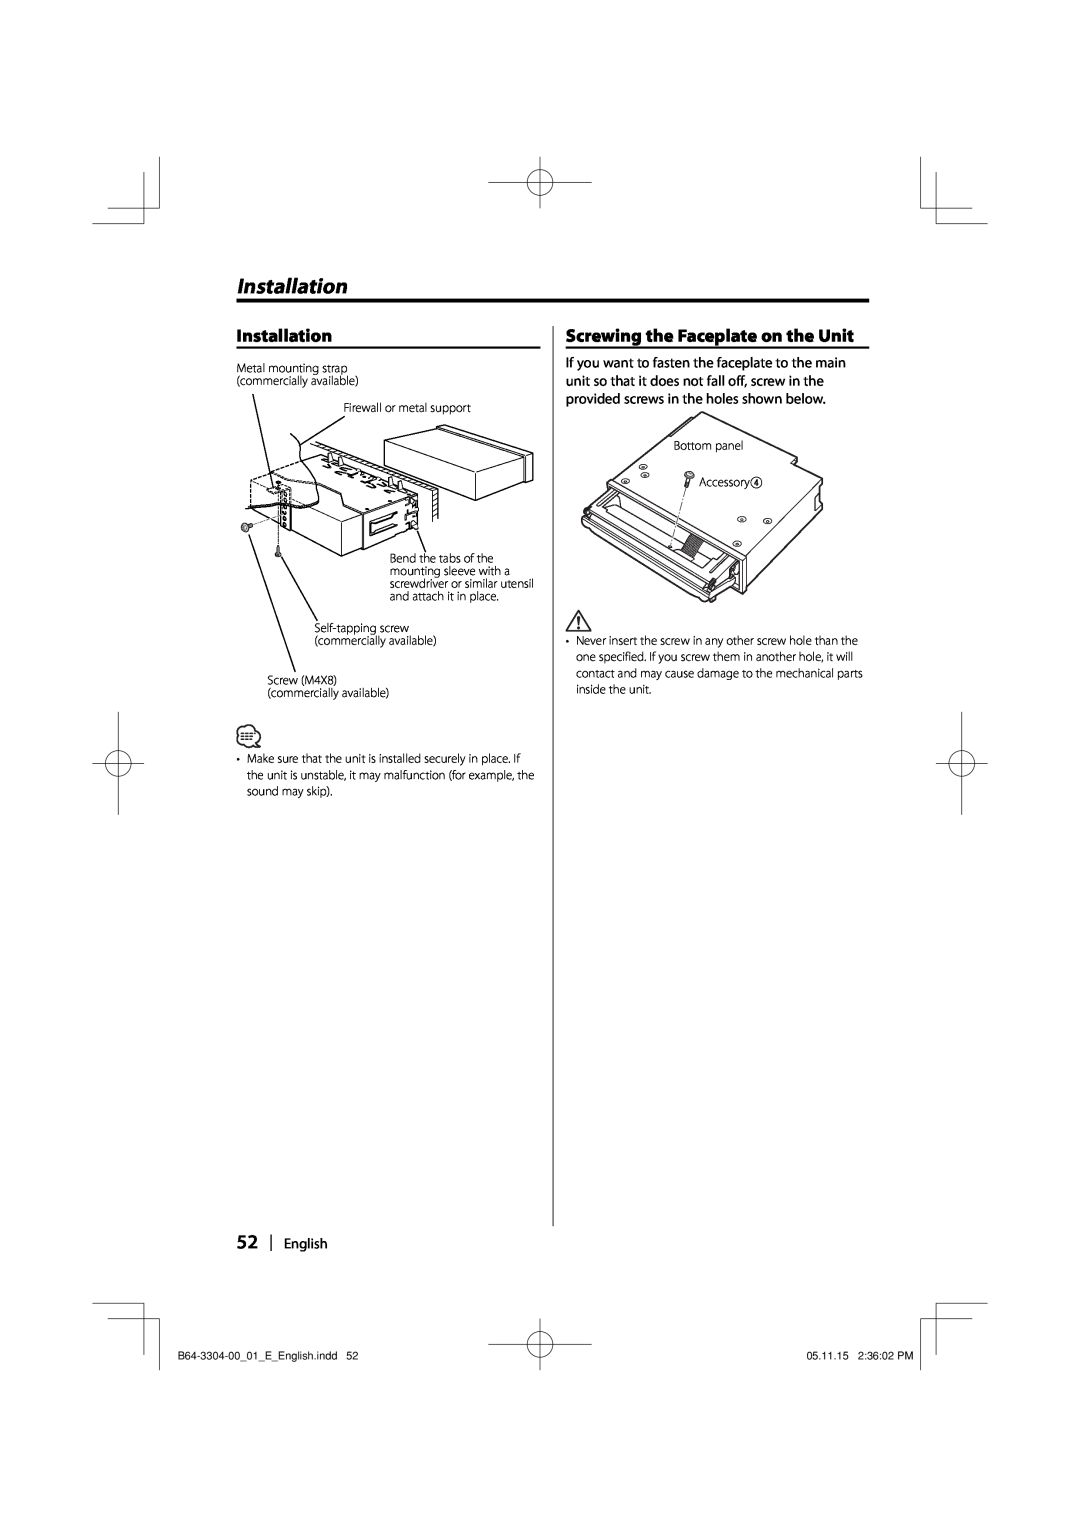 Dolby Laboratories KDC-W8534 instruction manual Installation, Screwing the Faceplate on the Unit 